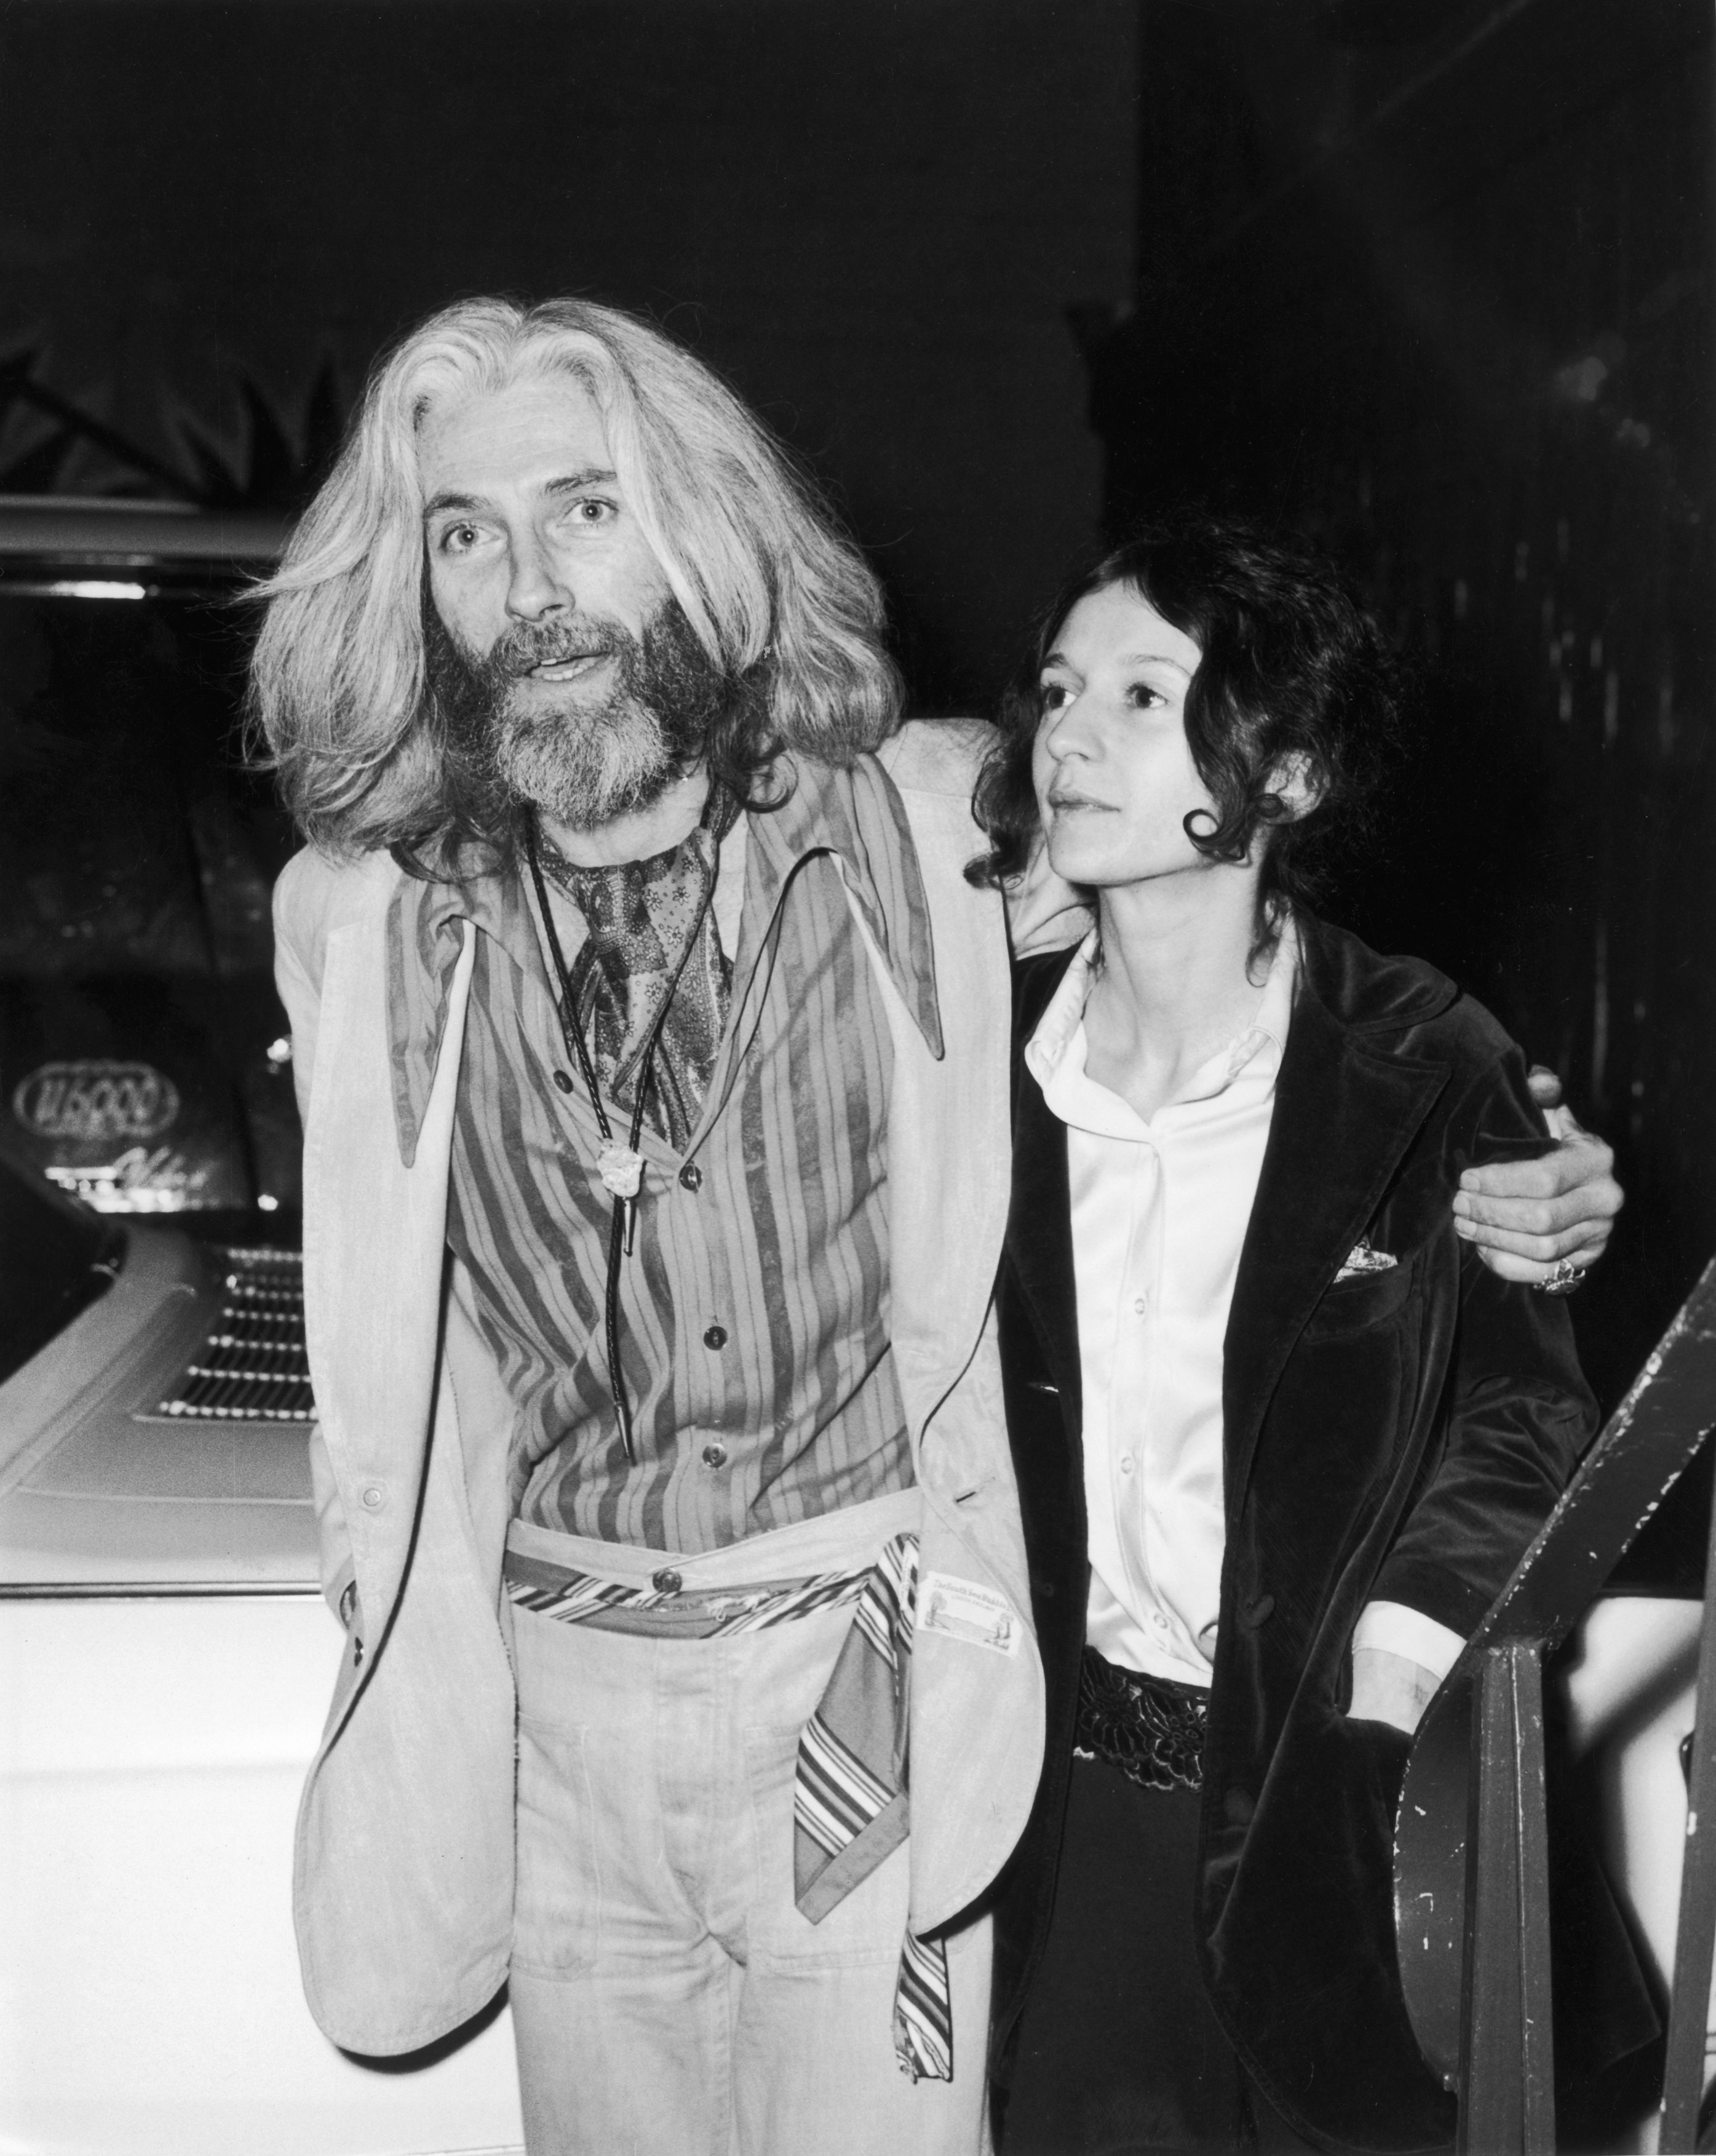 John Drew Barrymore and Ildiko Jaid Mako at a David Carradine and Barbara Hershey Seagull concert in West Hollywood, California, on December 1, 1973. | Source: Getty Images